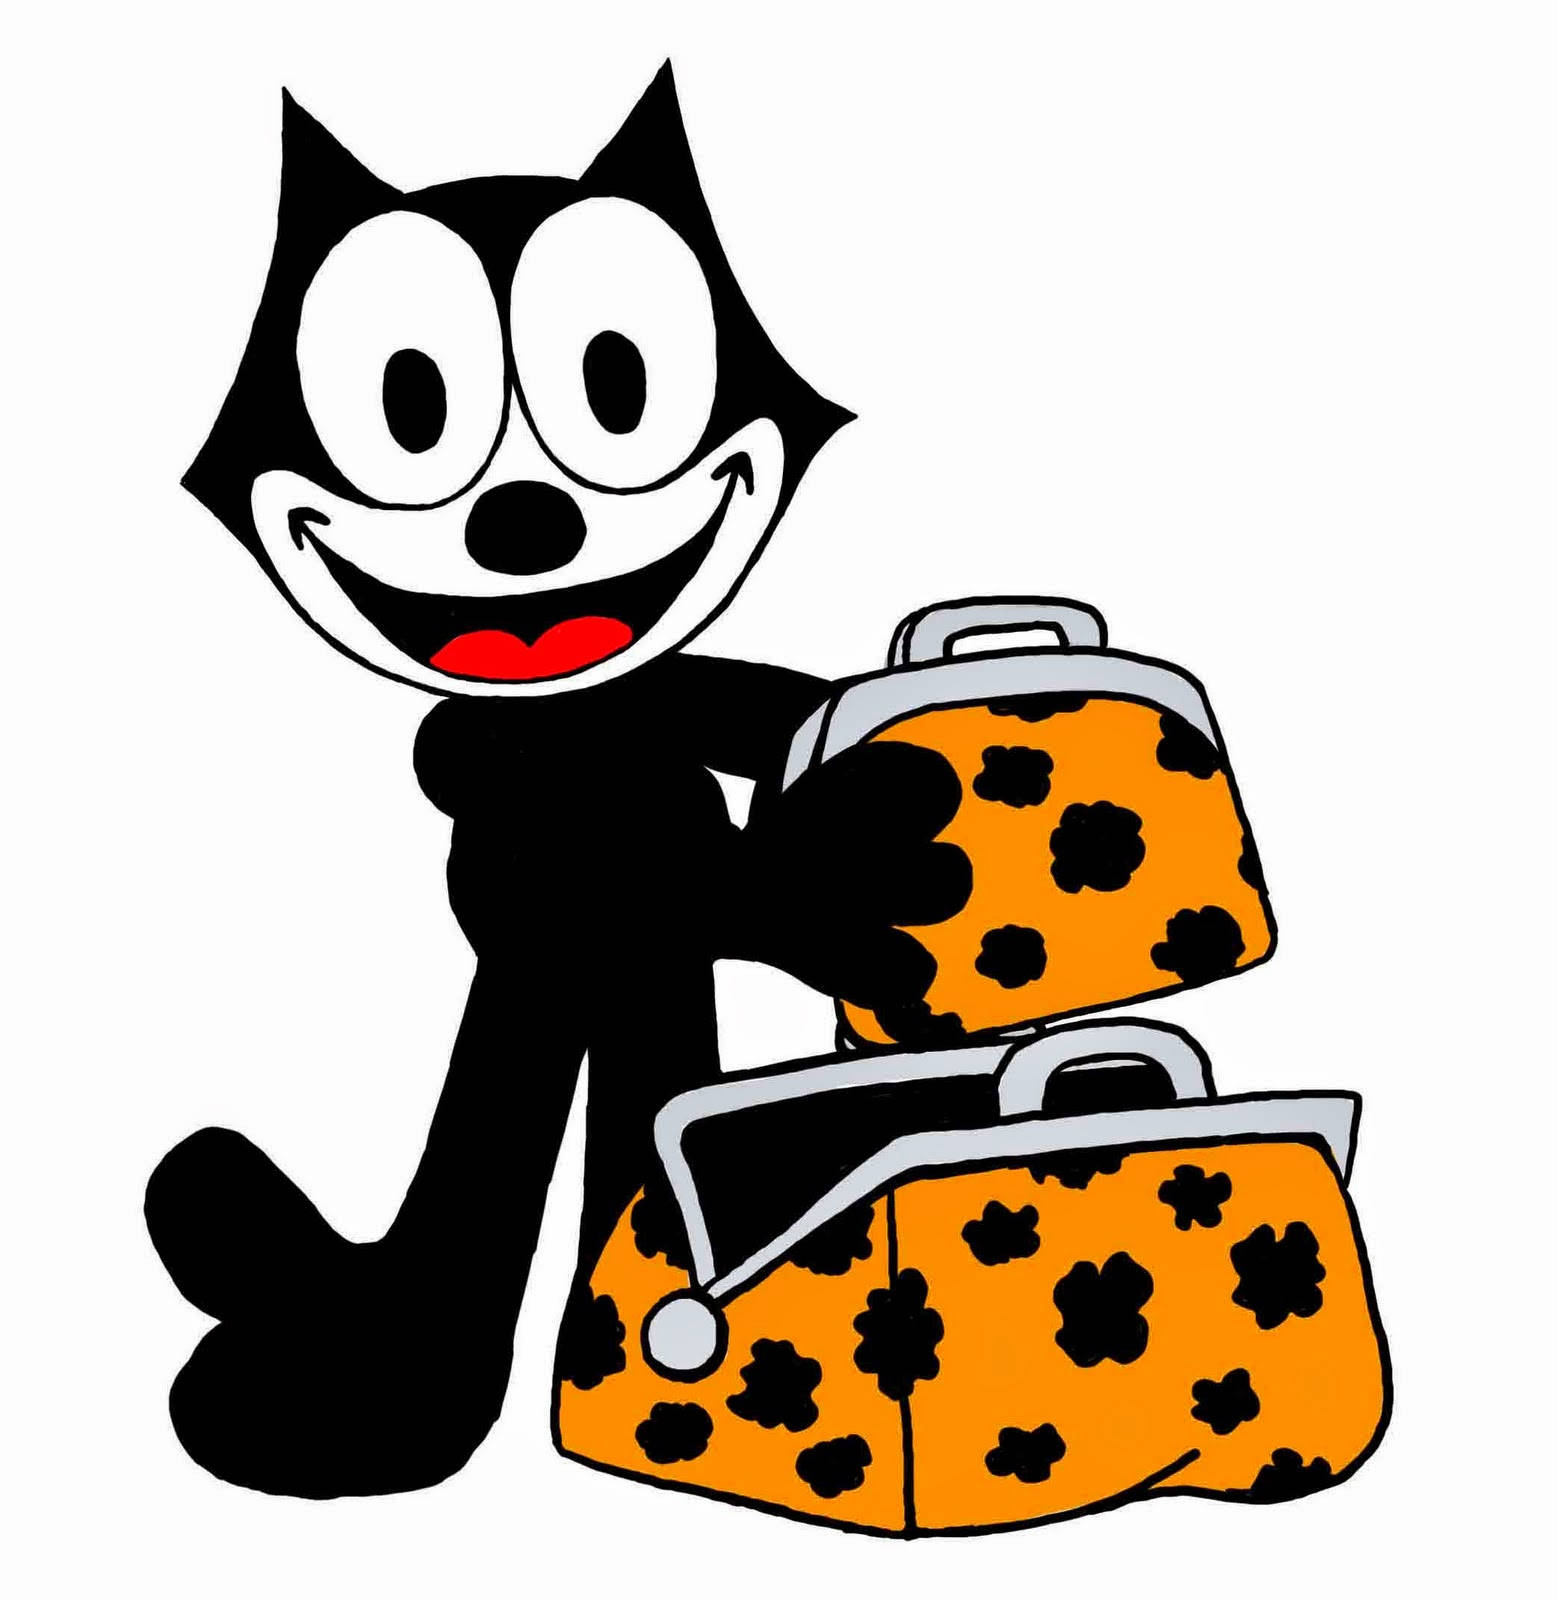 A Smiling Felix The Cat Posing In A Classic Animated Style Wallpaper